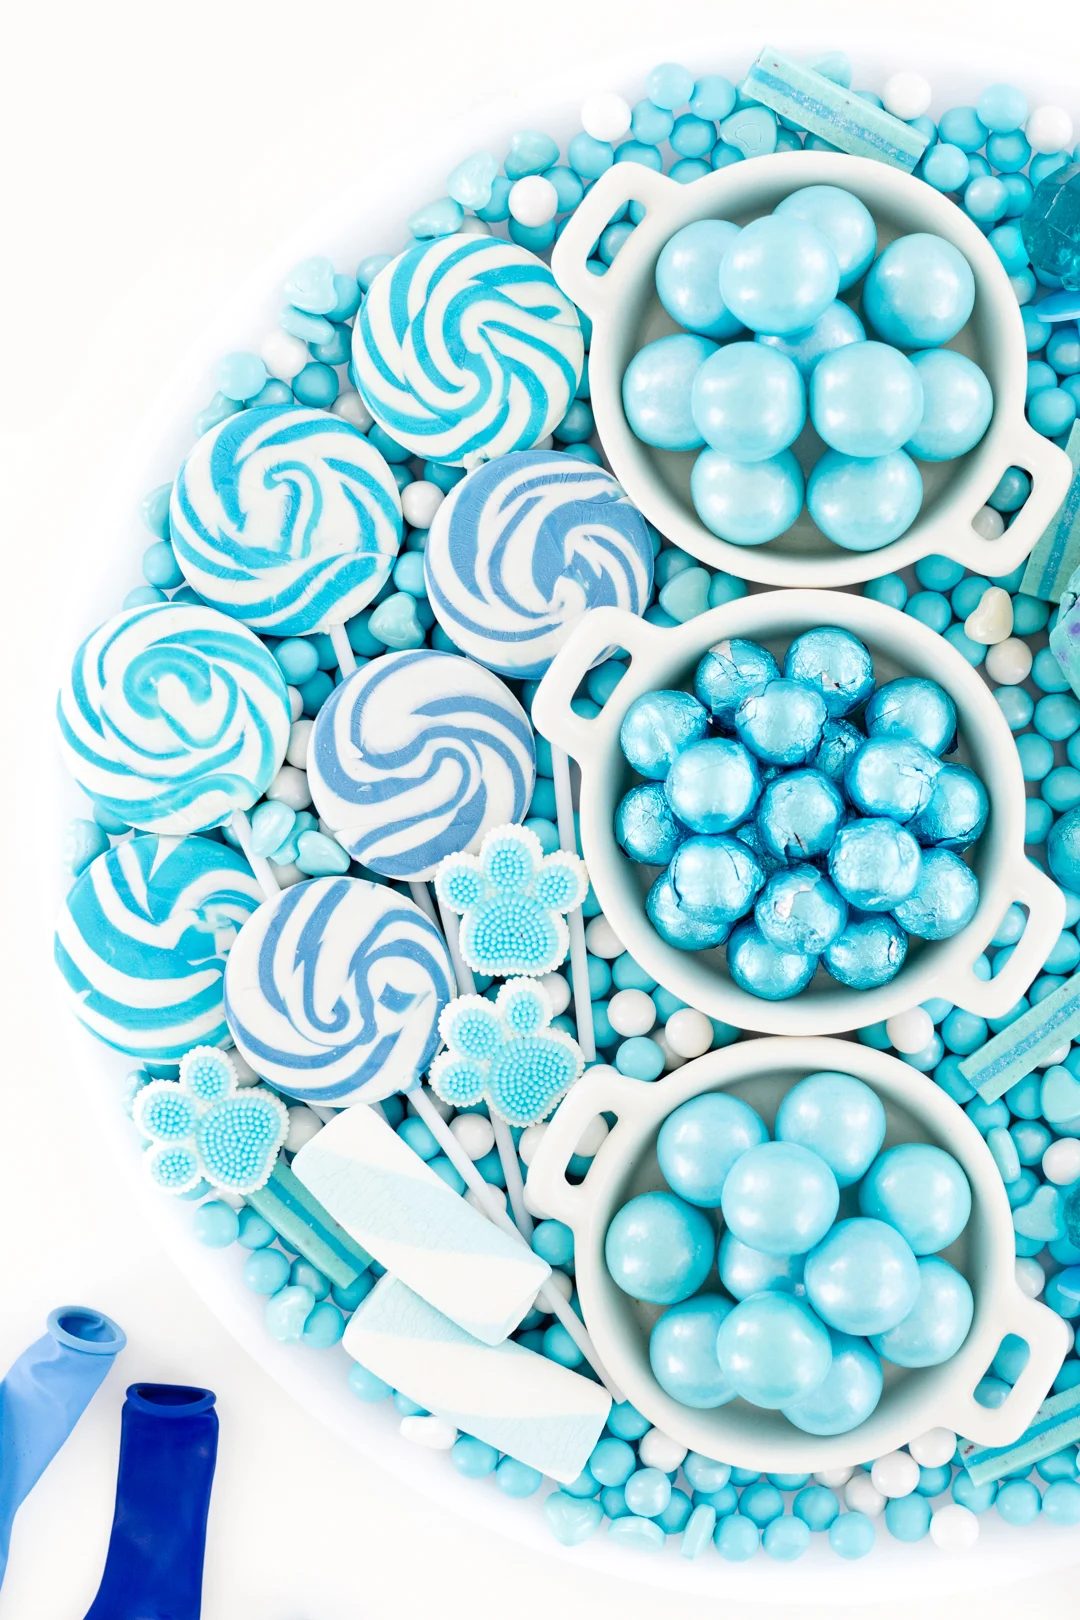 candy board with swirl lollipops in various shades of blue